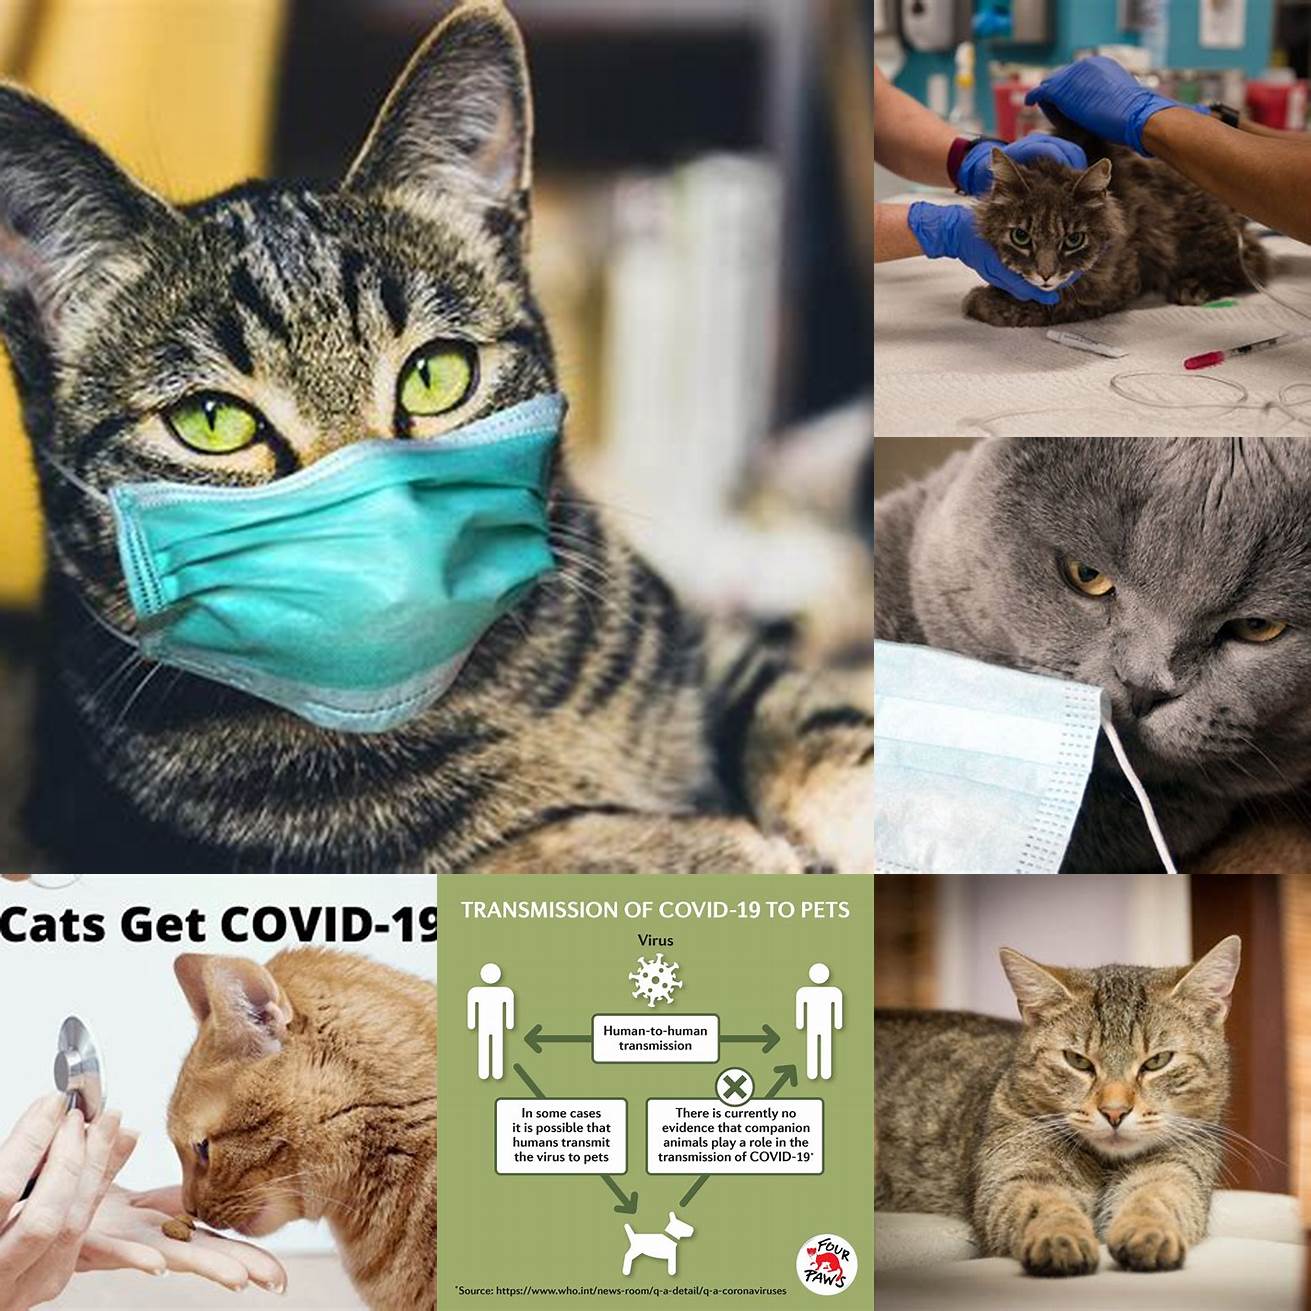 Can cats spread COVID-19 to humans